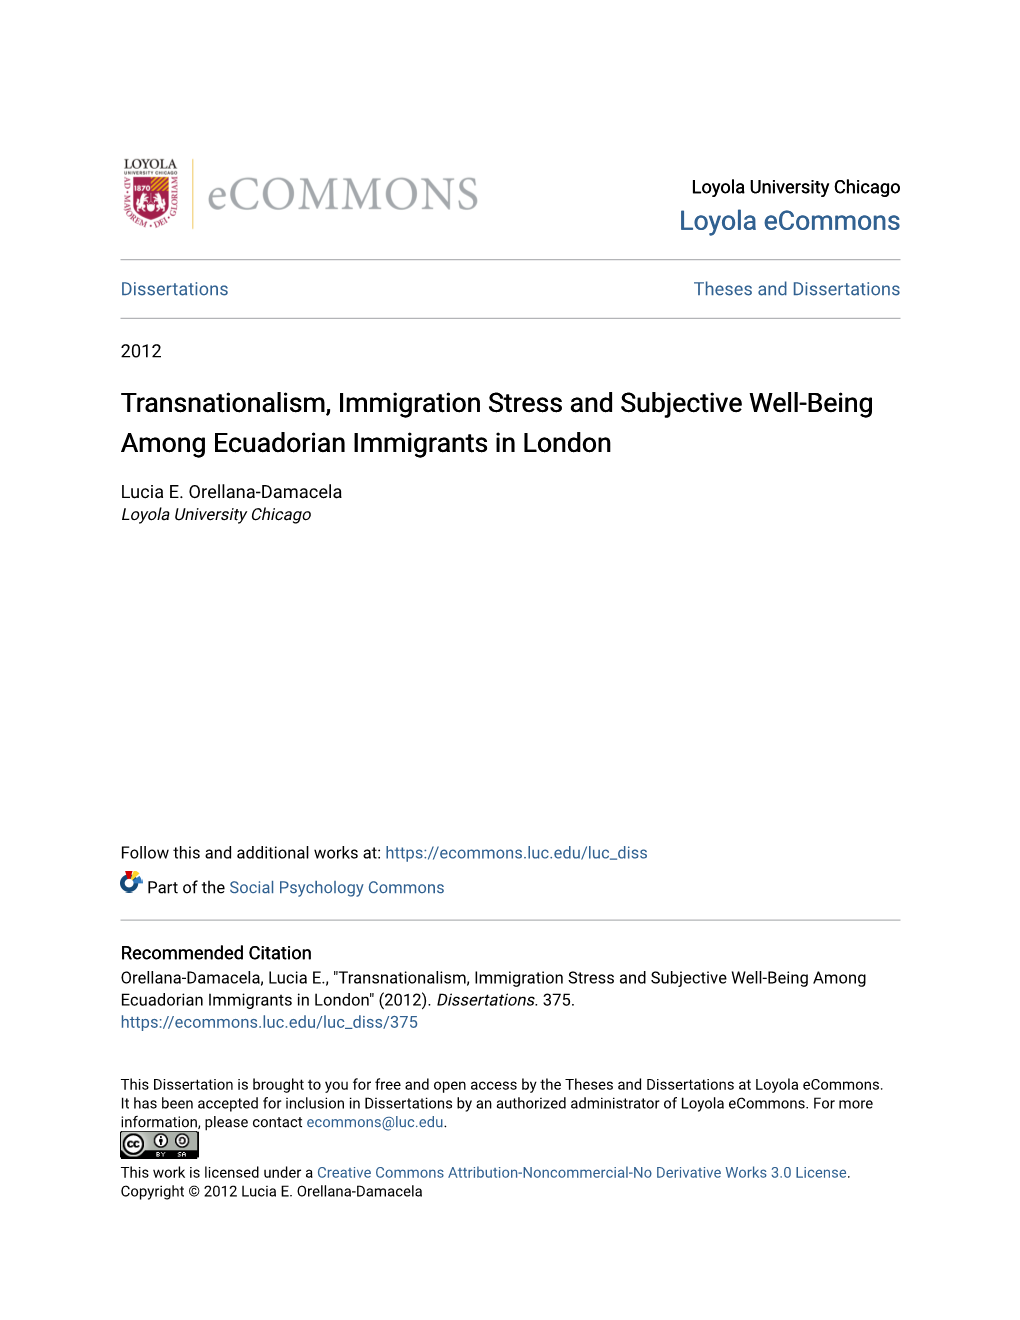 Transnationalism, Immigration Stress and Subjective Well-Being Among Ecuadorian Immigrants in London